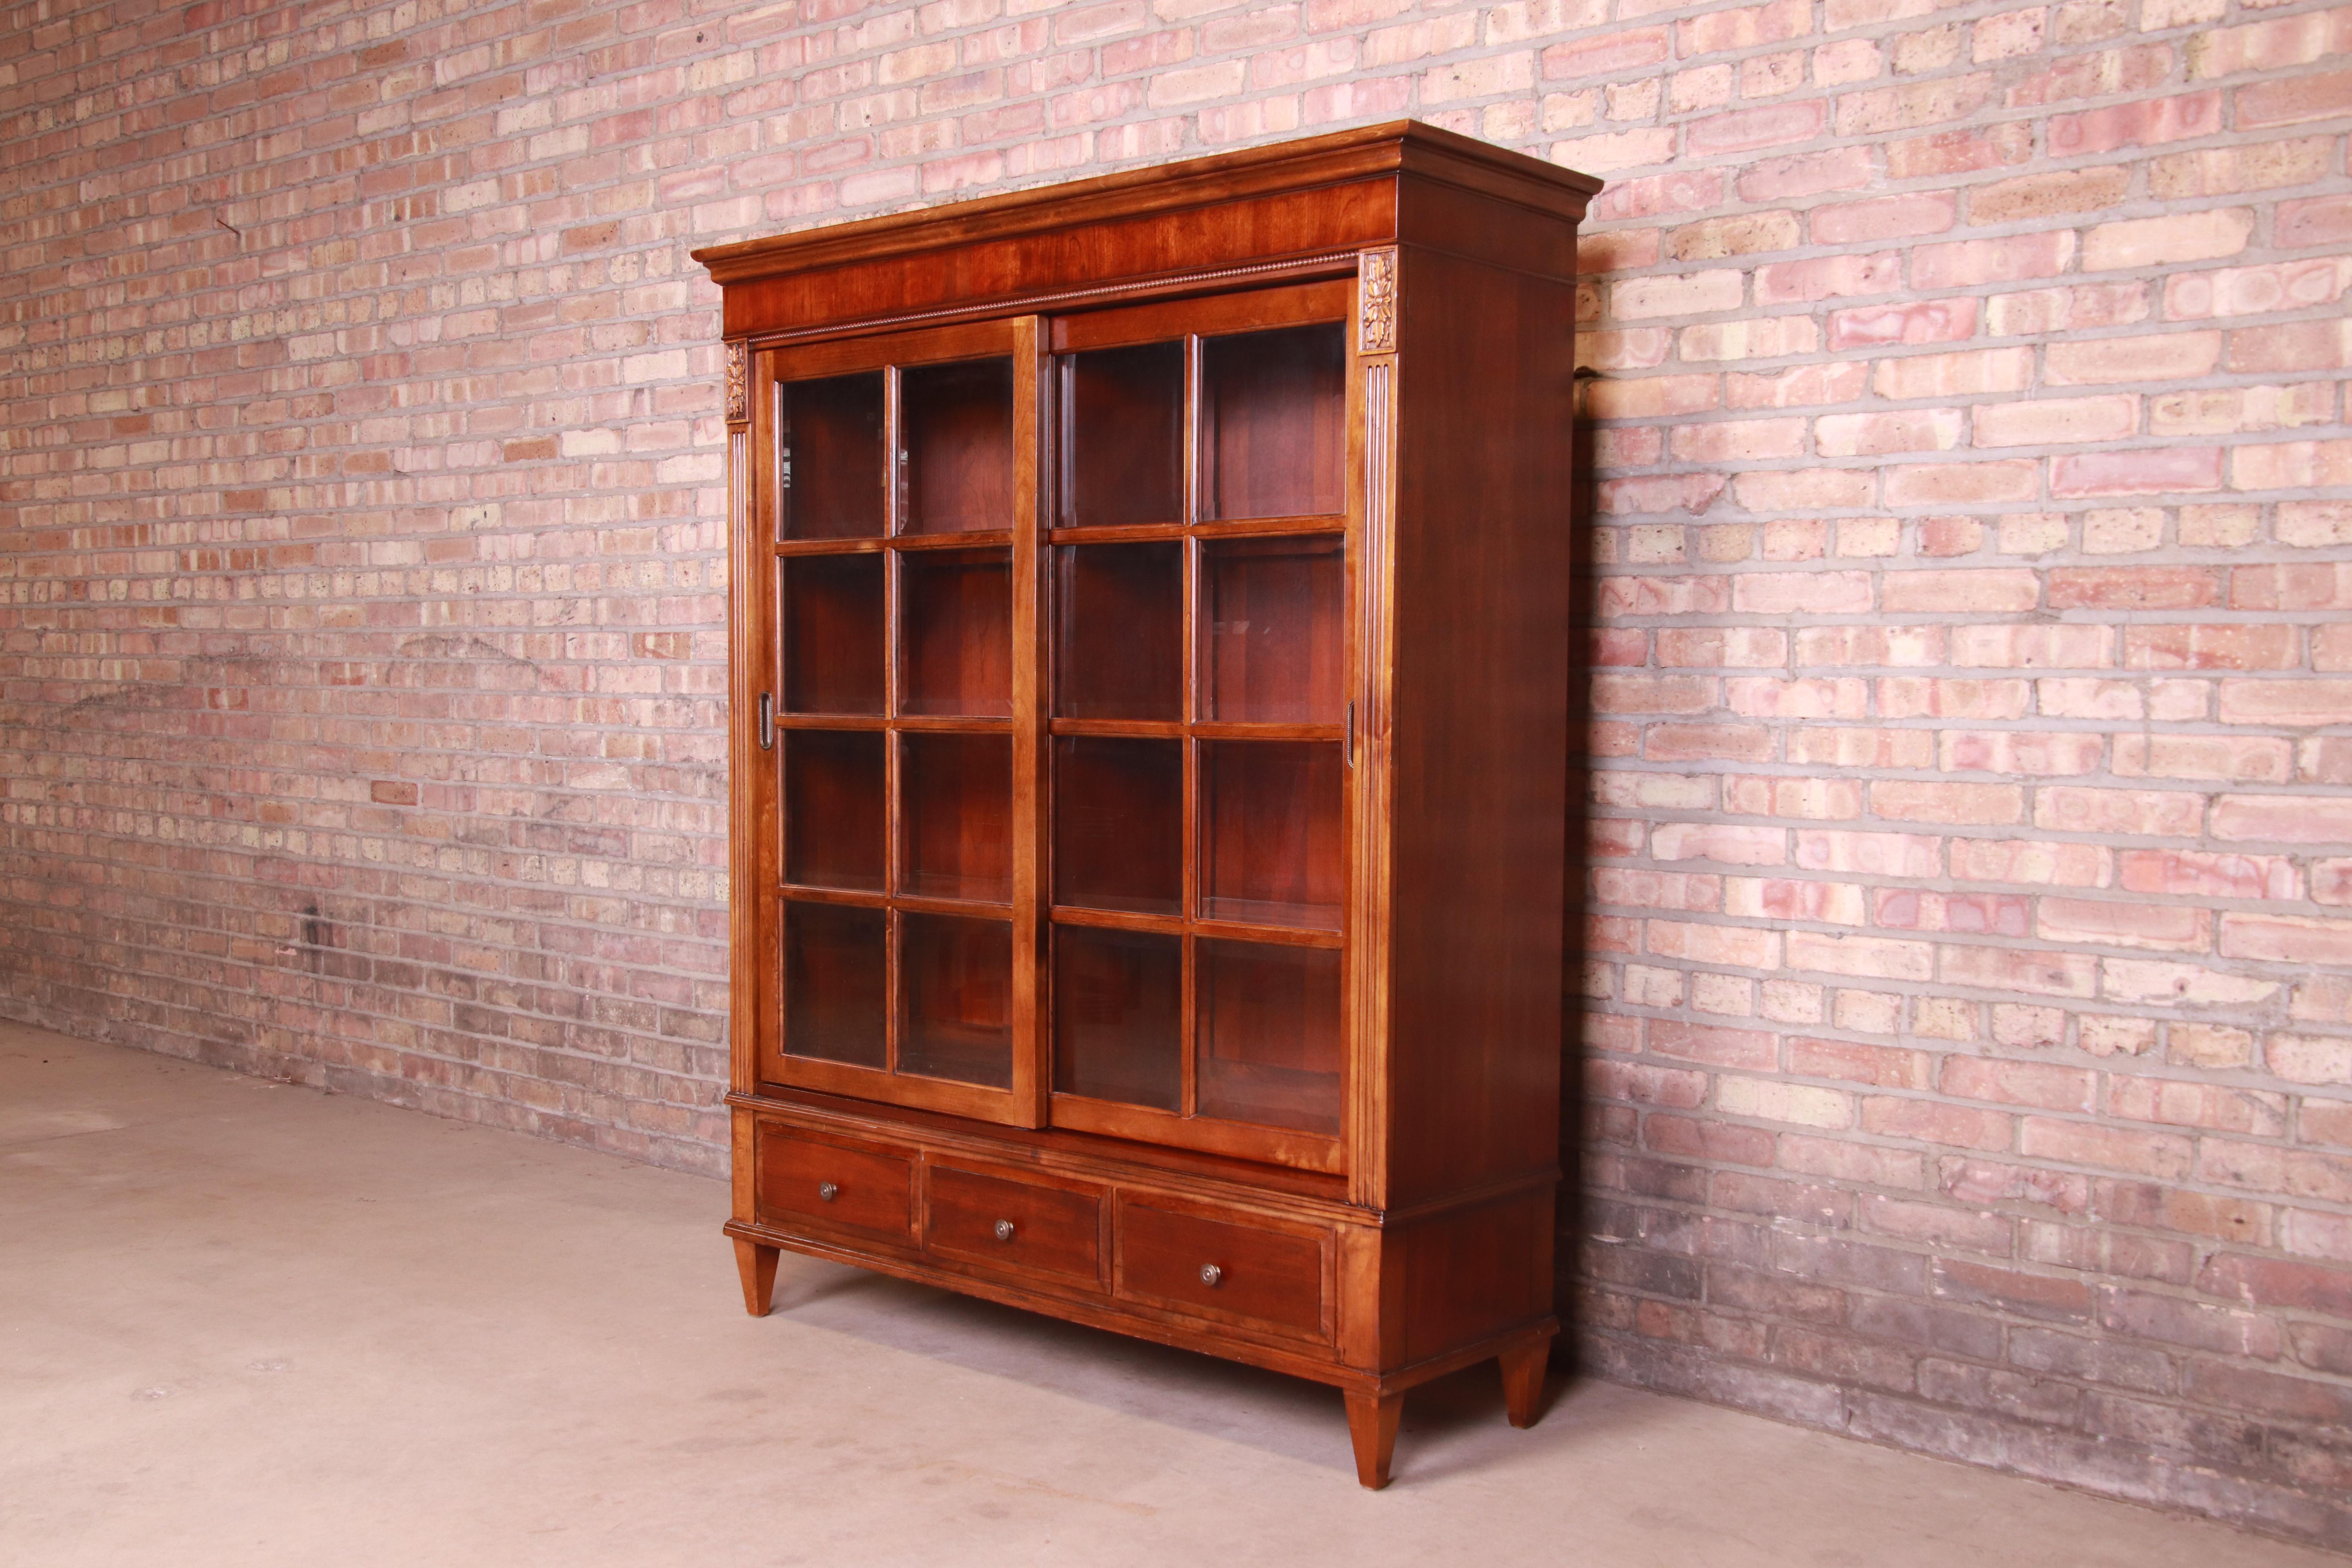 A gorgeous French Provincial or Regency style lighted display cabinet or bookcase

By Ethan Allen

USA, Circa 1990s

Carved cherry wood, with beveled glass front sliding doors.

Measures: 52.5